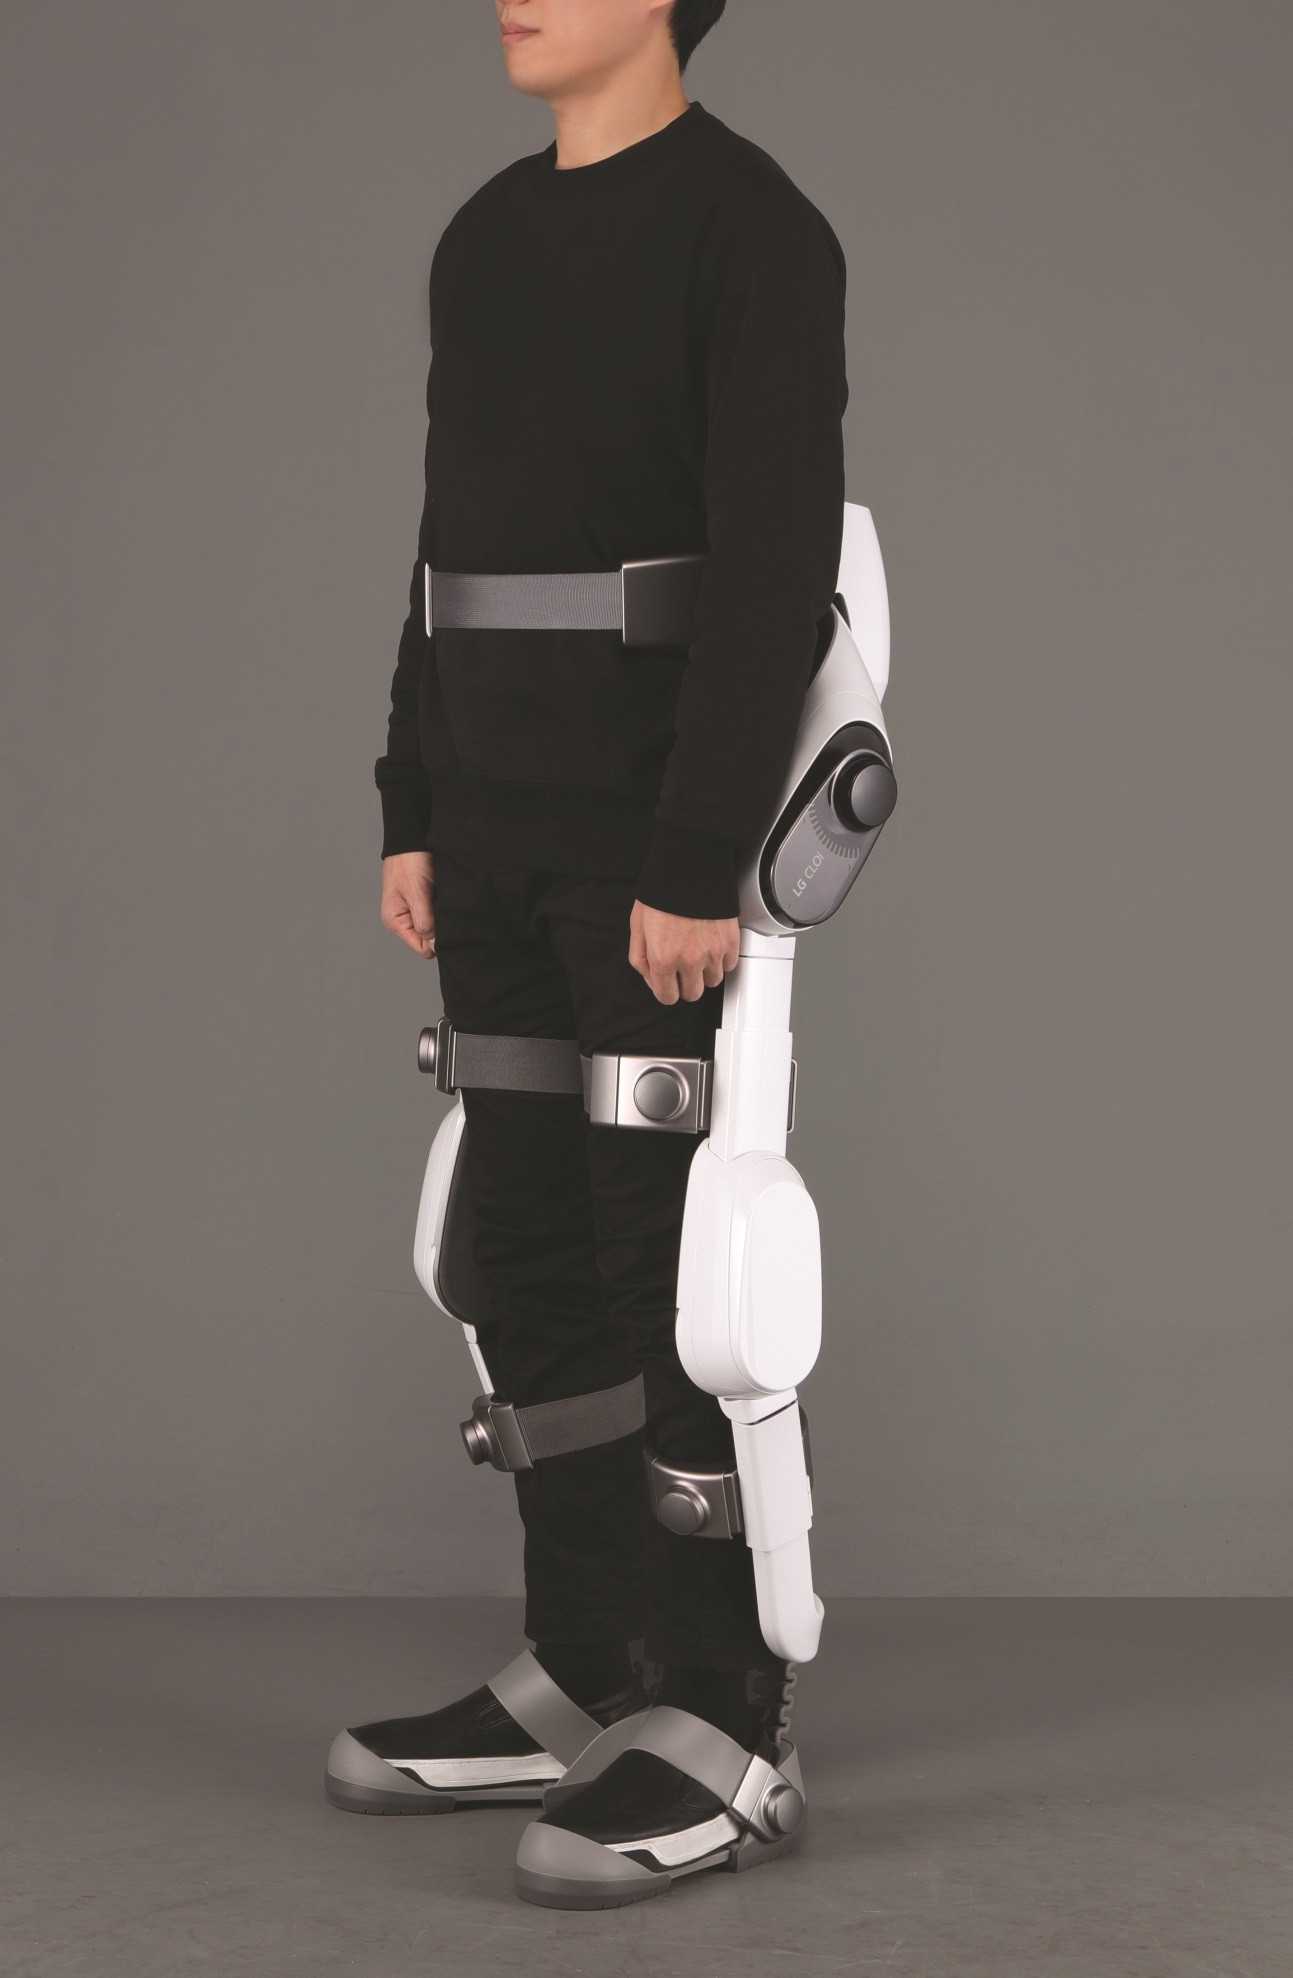 LG-CLOi-SuitBot-Standing-Front